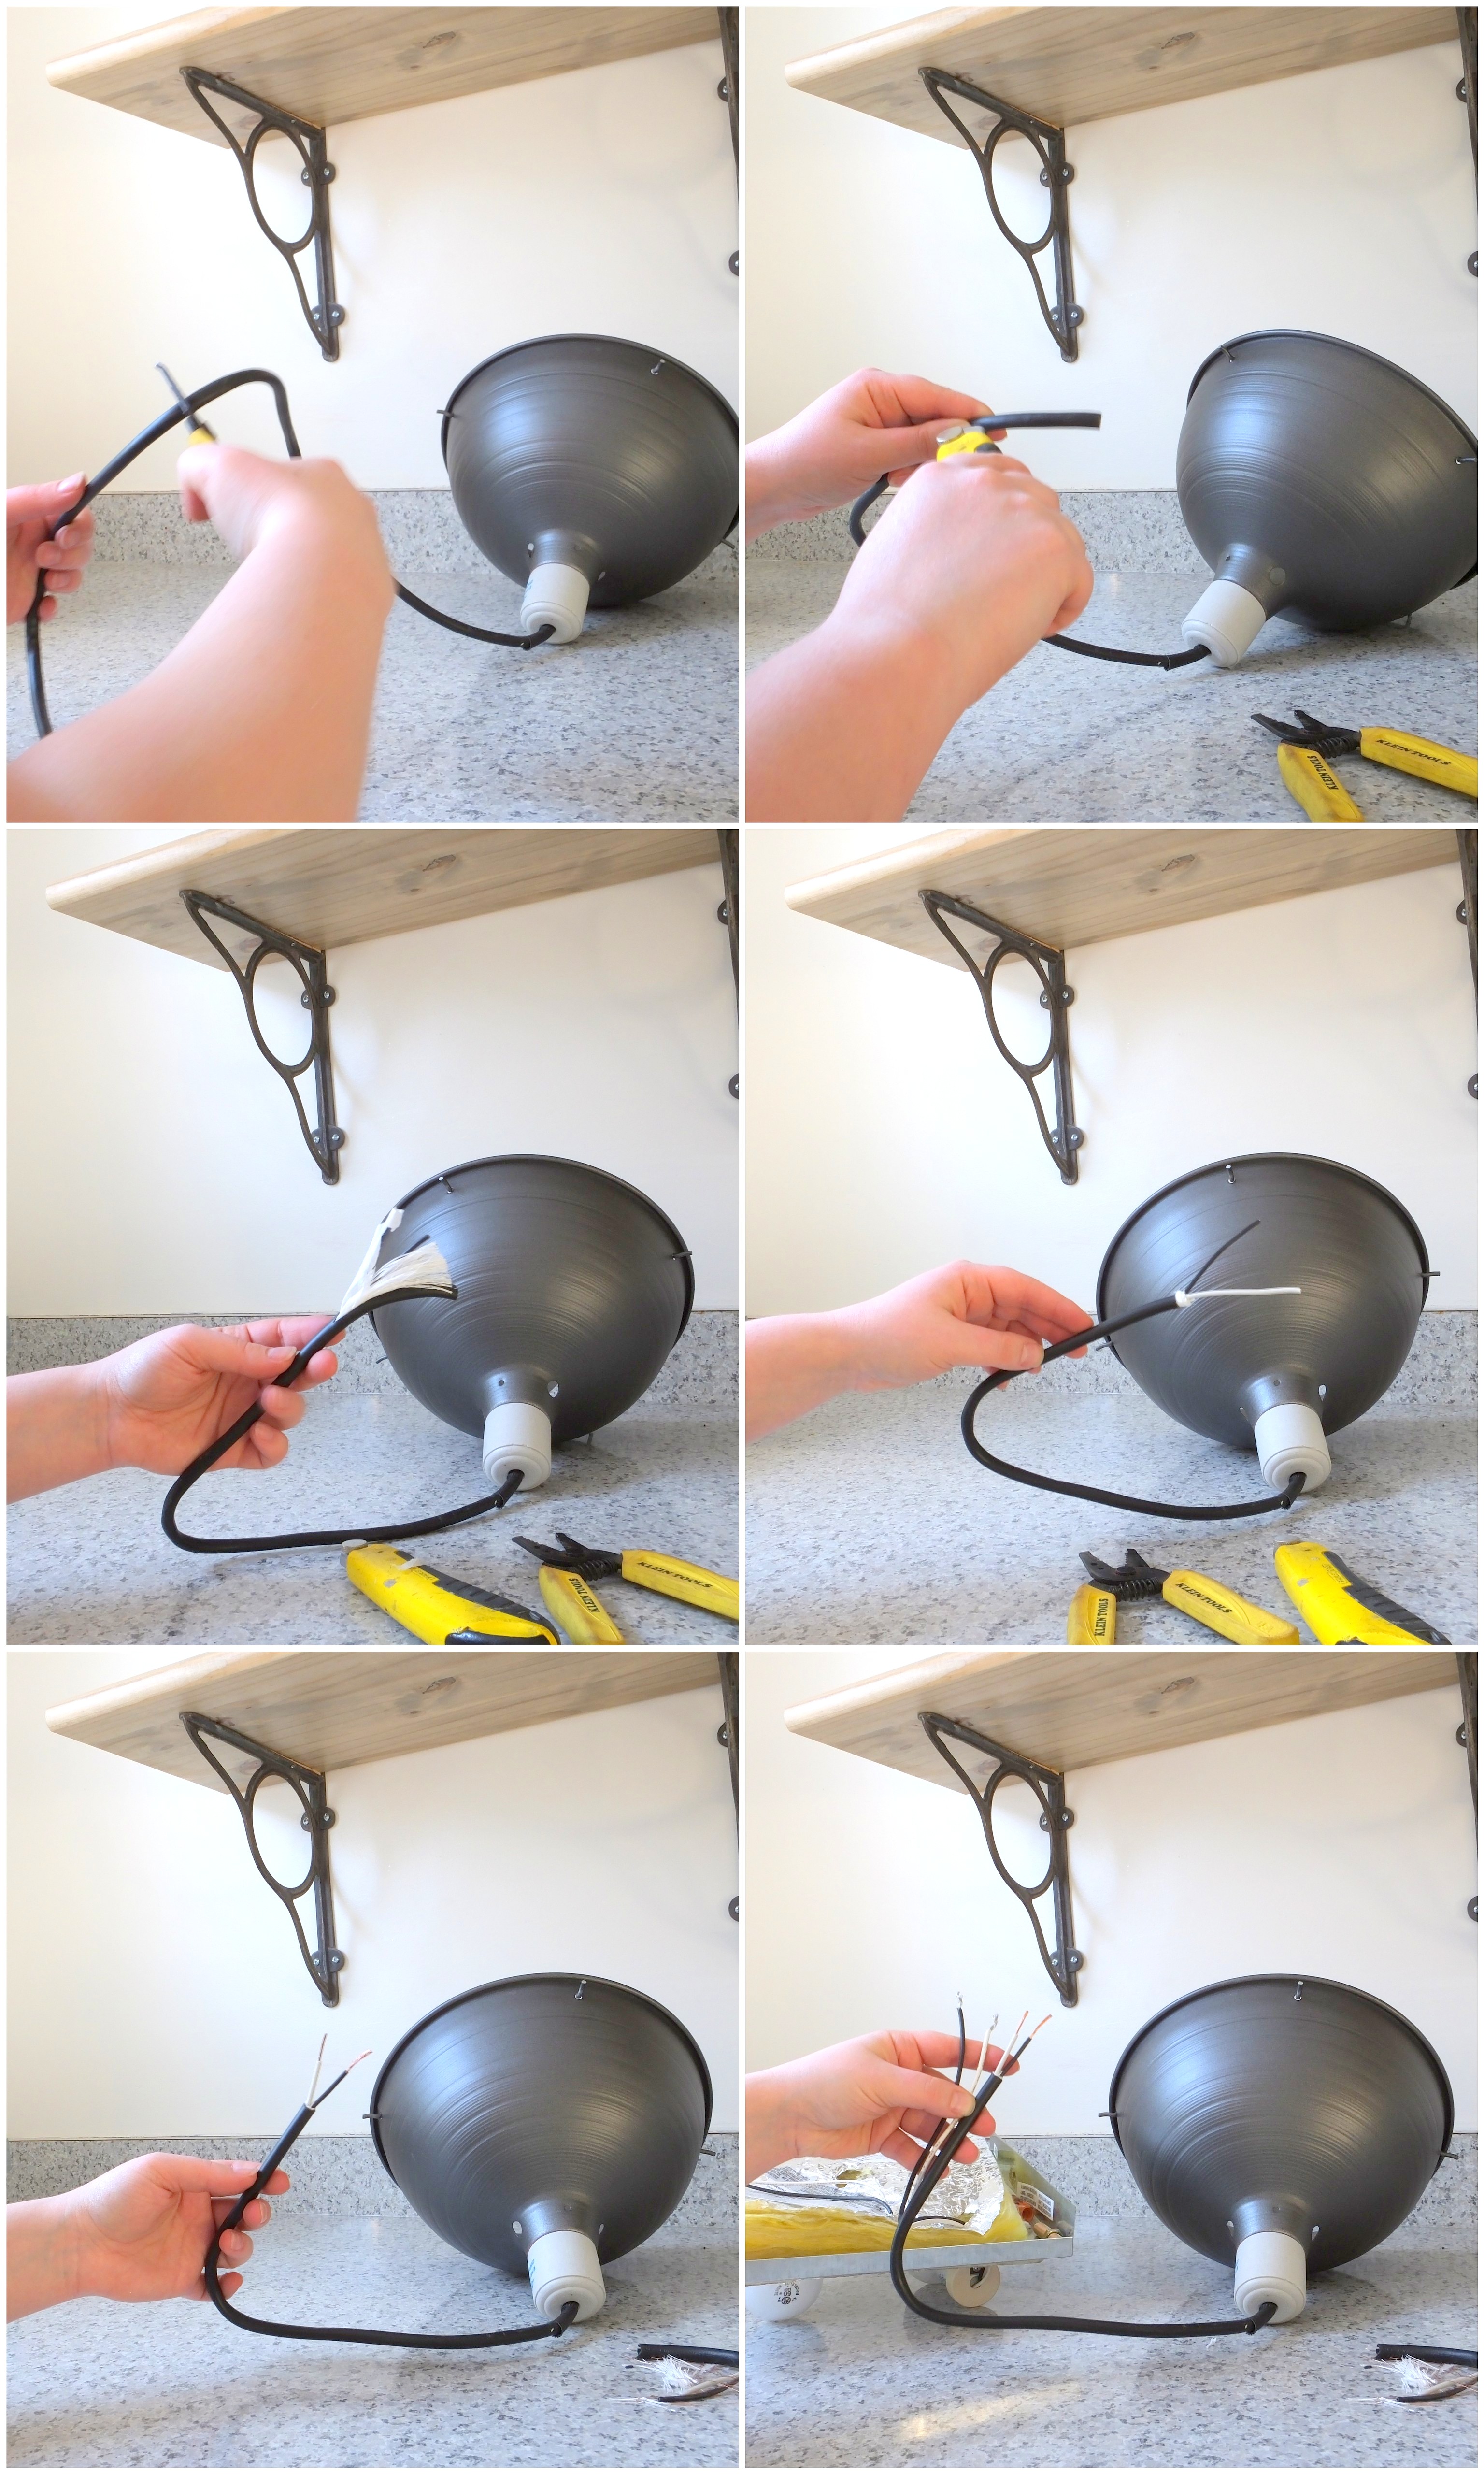 A Plug In Light Into Ceiling, How To Install Plug In Pendant Light